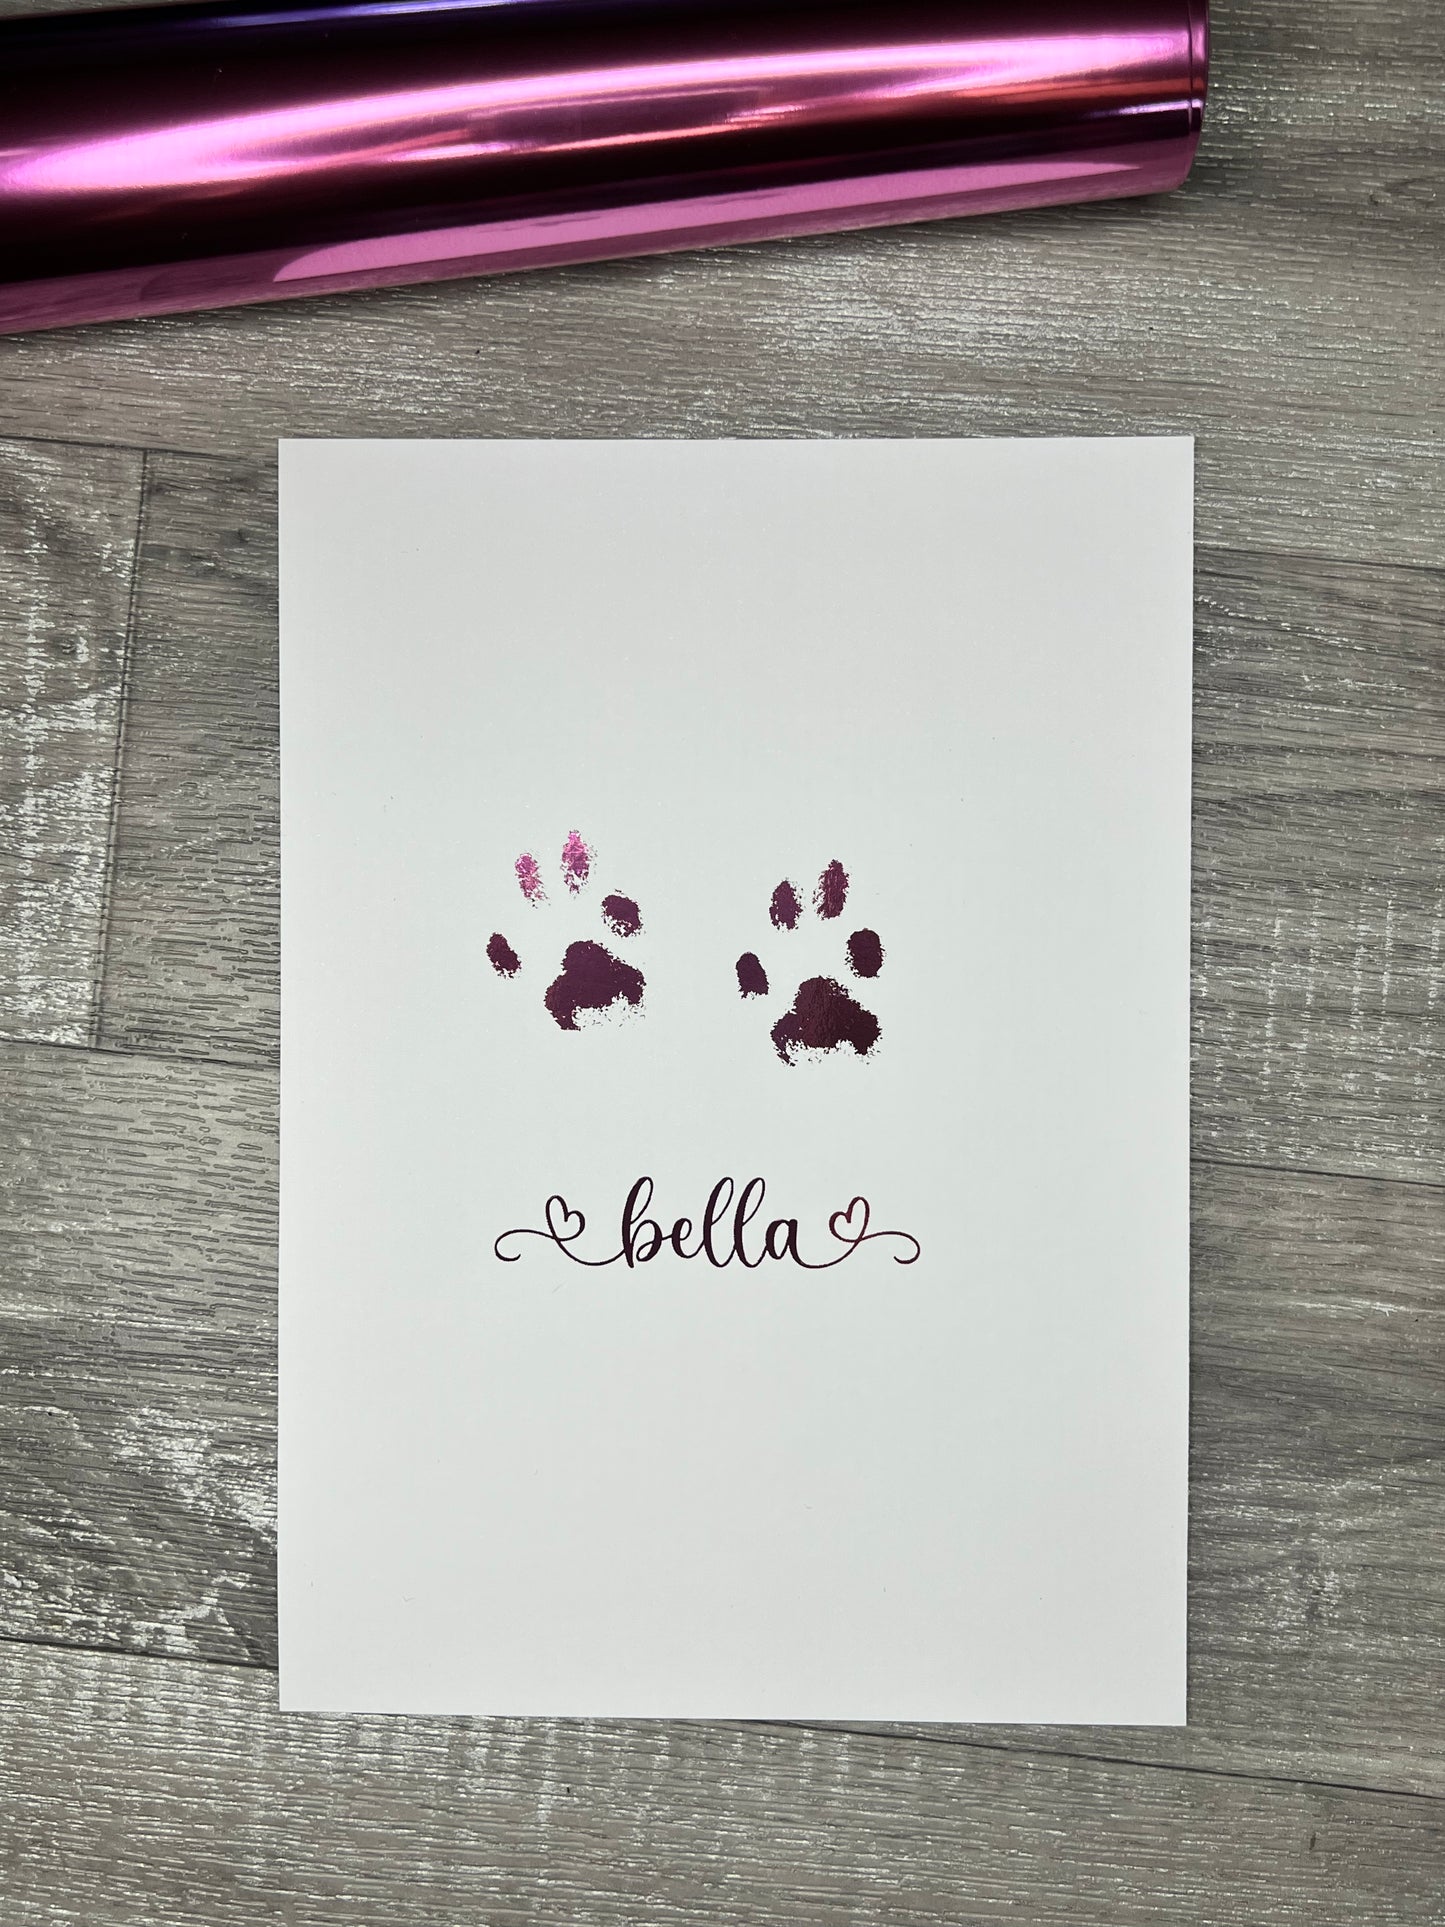 Your pets paw print In foil, memory paws